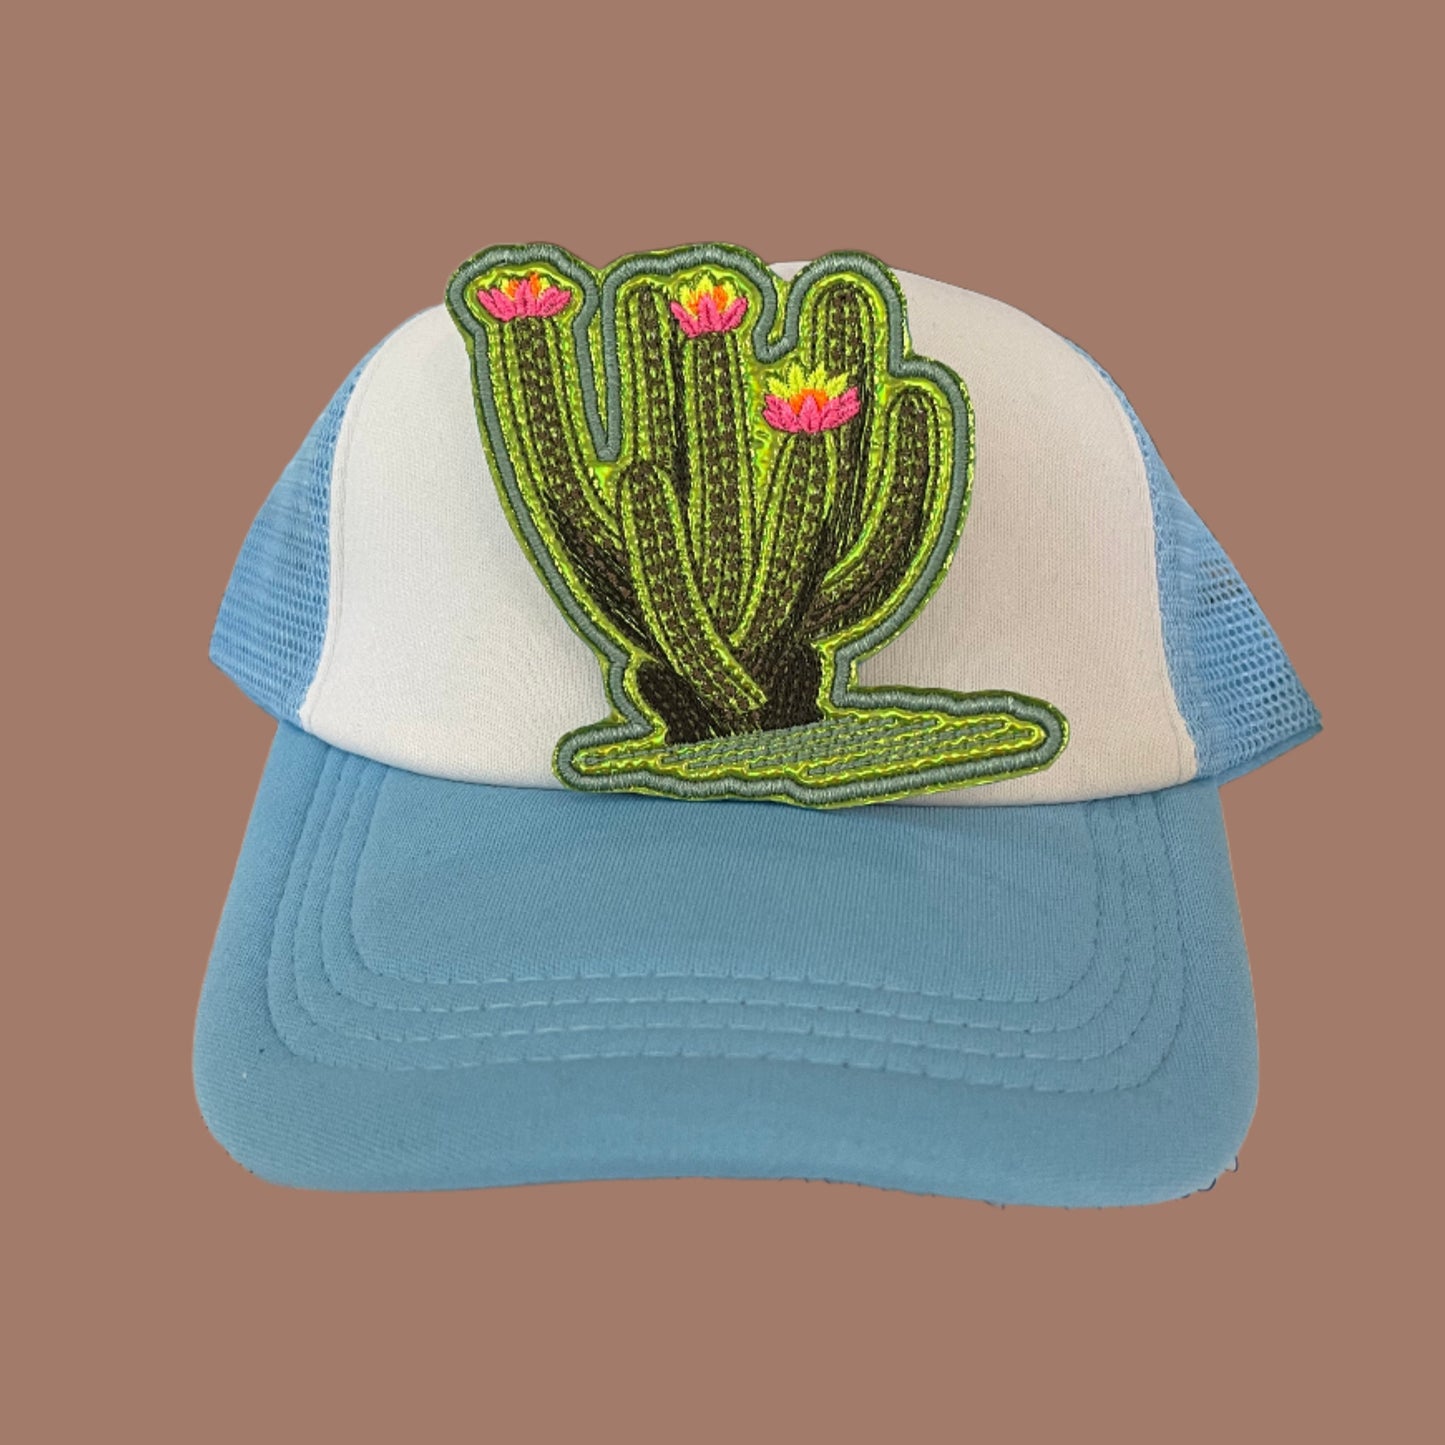 Iron-on patch featuring a large leggy cactus with neon yellow, neon orange, and neon pink flowers, green metallic vinyl showing through stitching gaps, and an aqua outline.